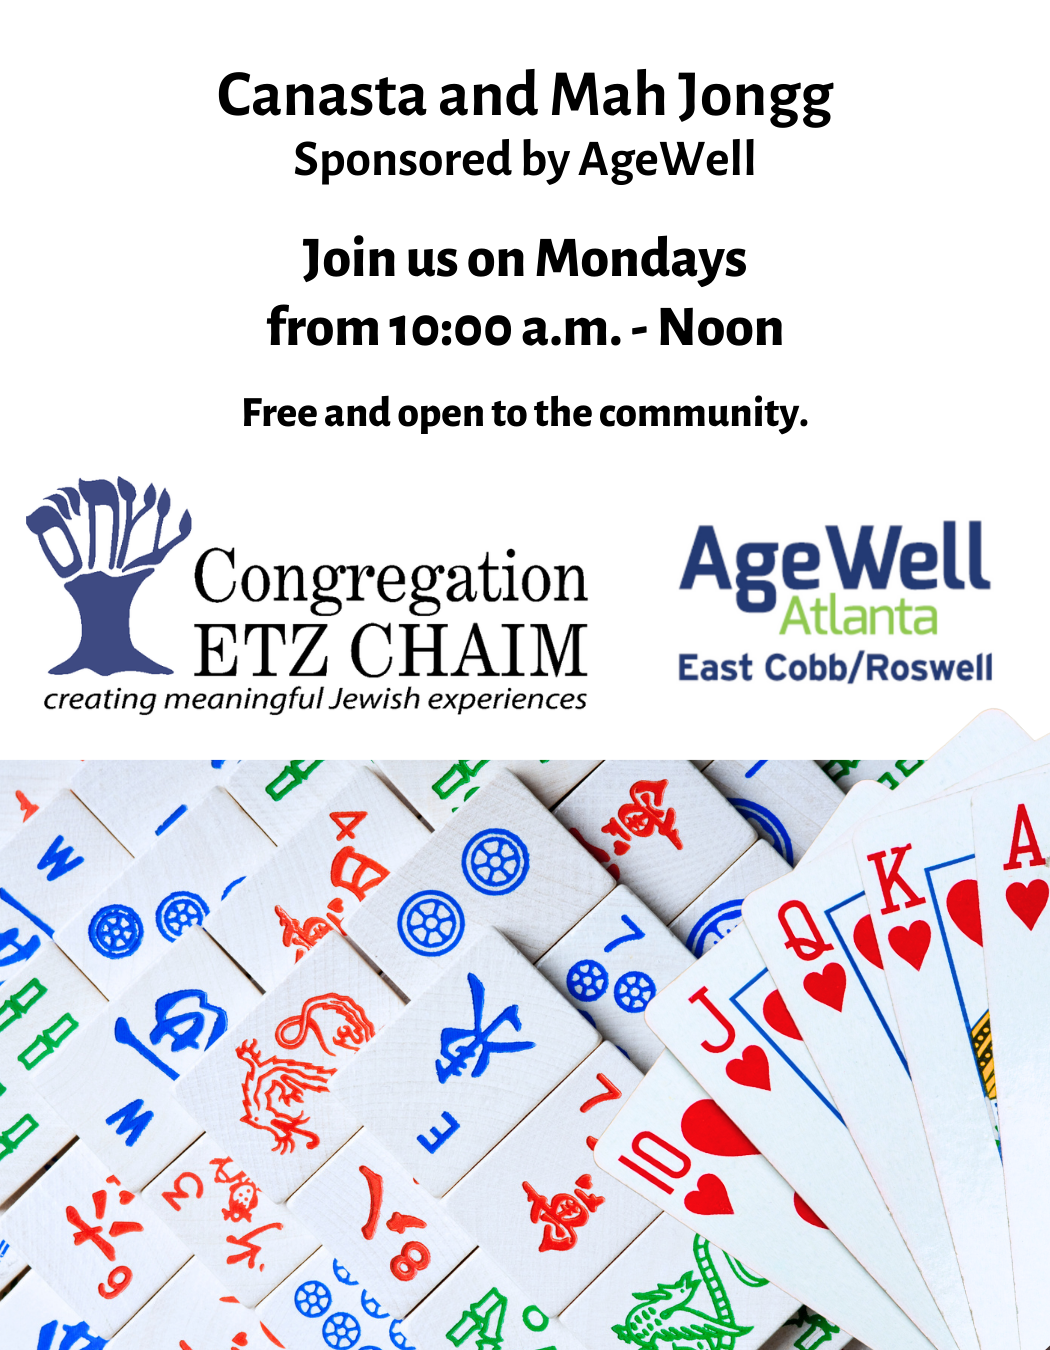 Mah Jongg and Canasta at Congregation Etz Chaim sponsored by AgeWell